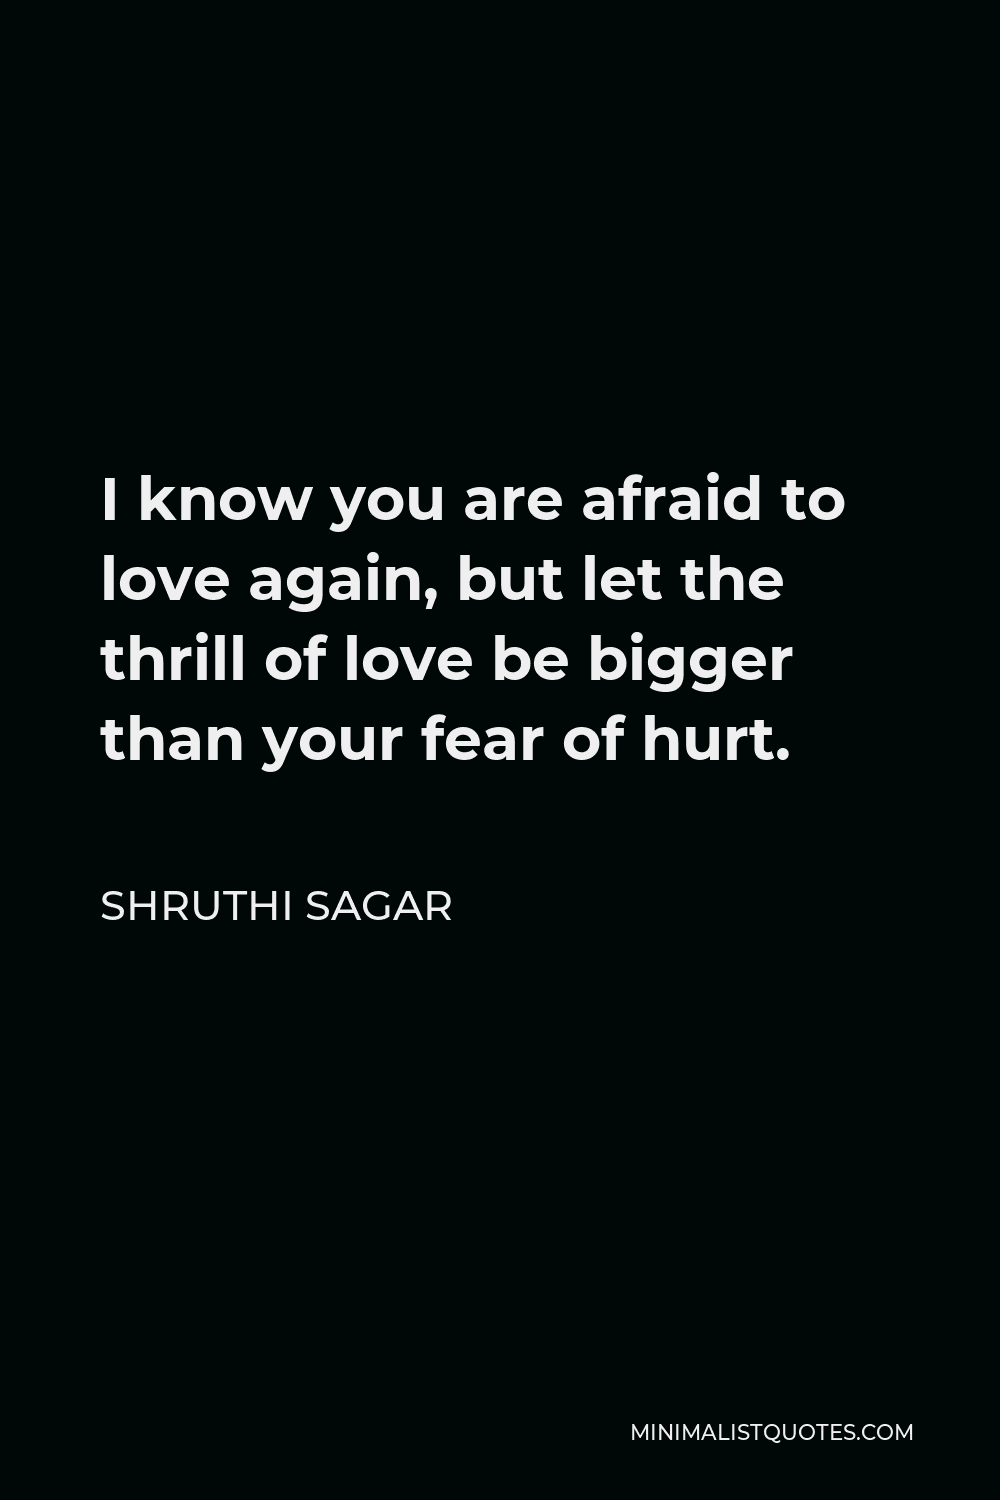 Shruthi Sagar Quote: I know you are afraid to love again, but let the  thrill of love be bigger than your fear of hurt.